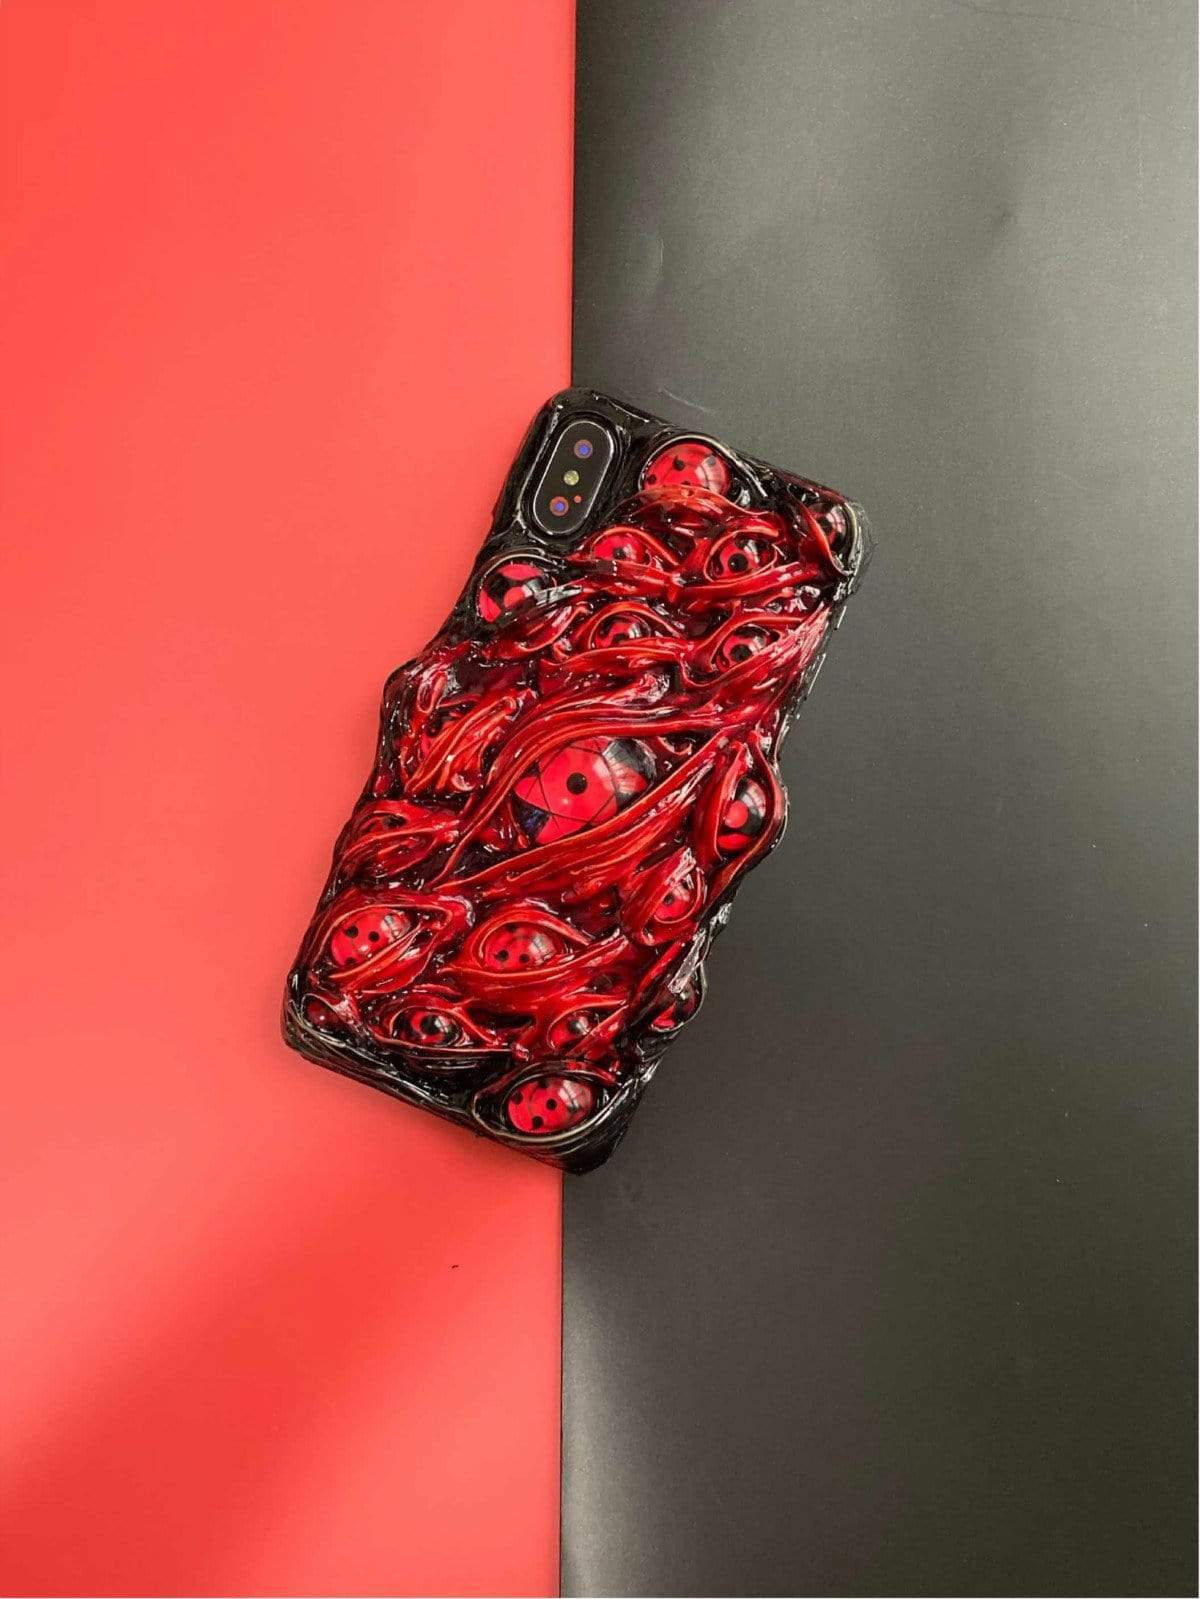 Techypop iPhone Case Blood is Always Watching Designer iPhone Case For iPhone 12 SE 11 Pro Max X XS Max XR 7 8 Plus